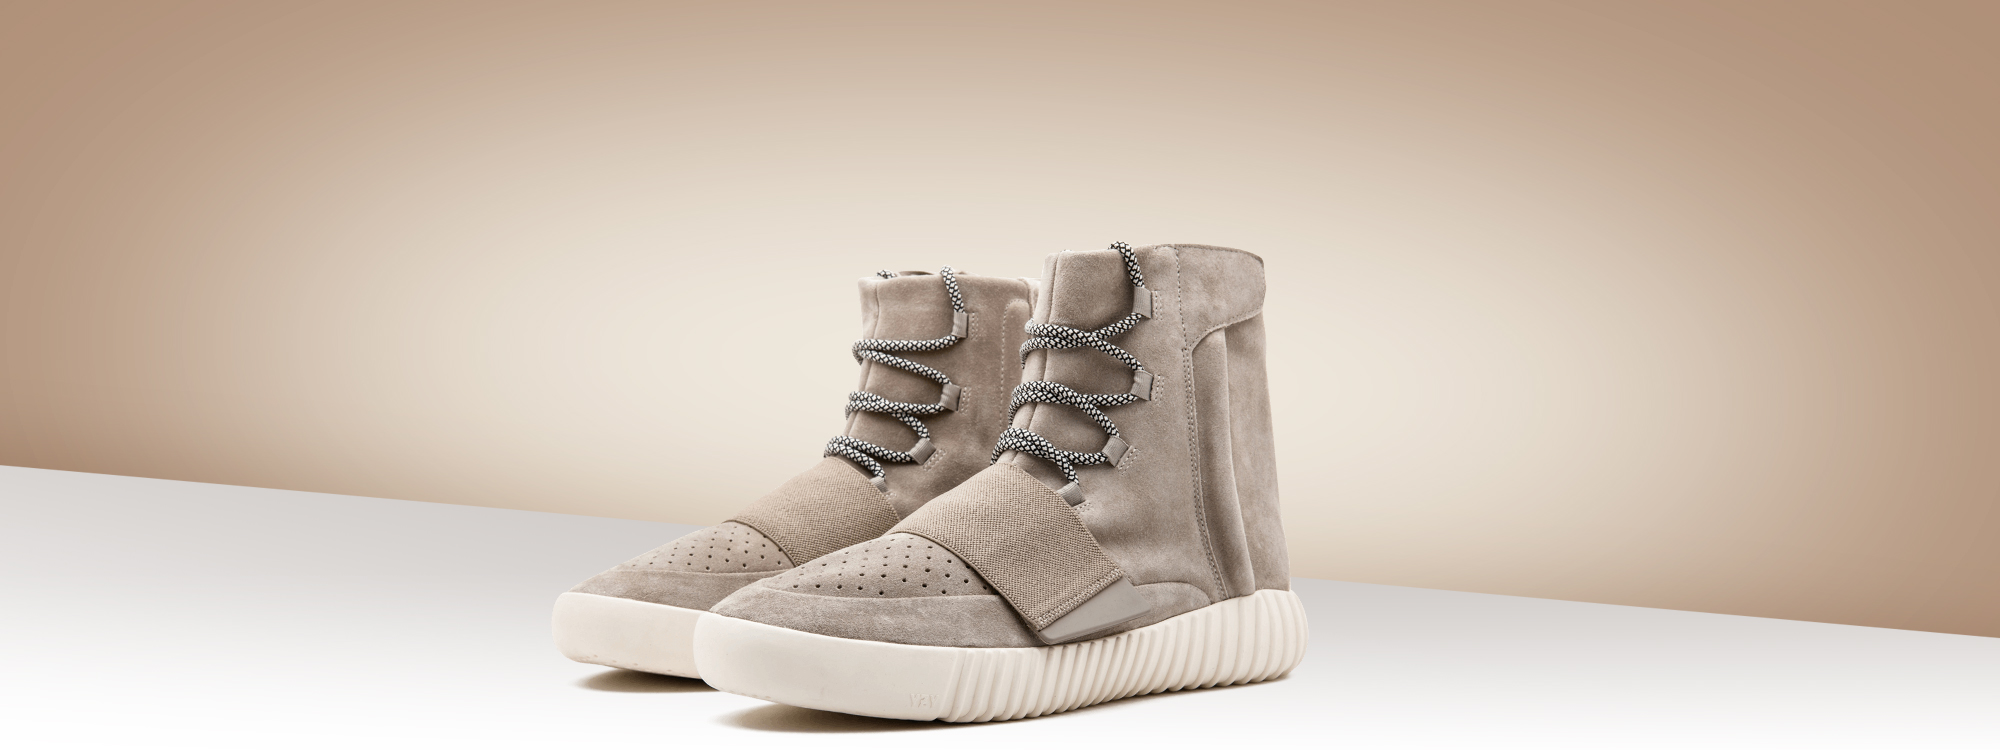  Yeezy Boost 750  Gray / White shoes price